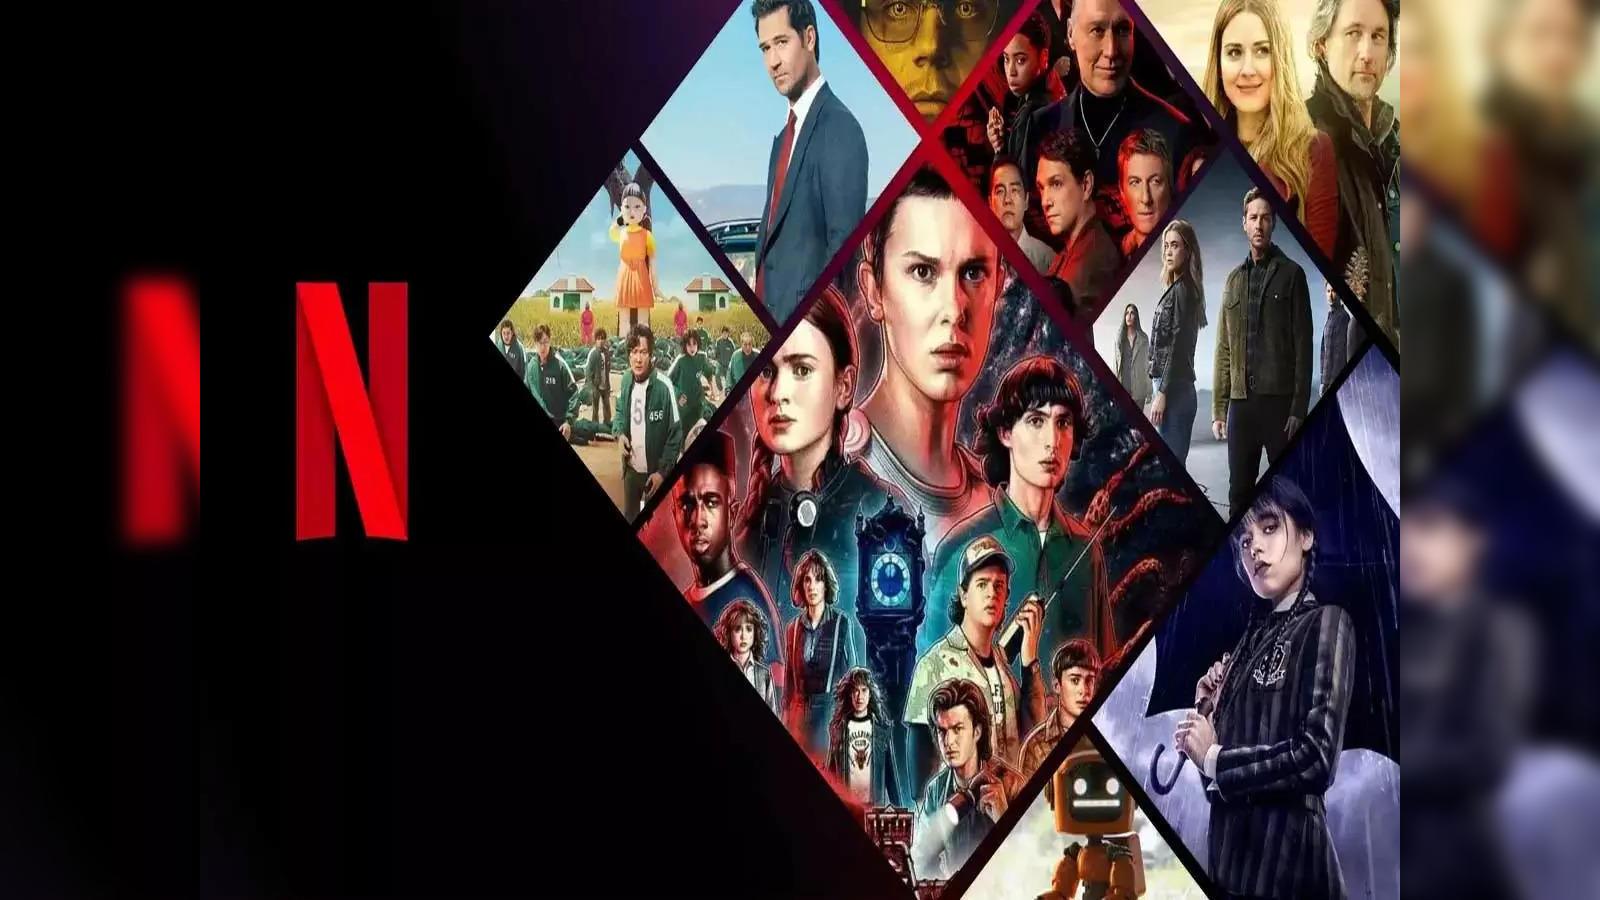 Renewed Netflix Series 2024: Every Show Coming Back for Another Season -  What's on Netflix